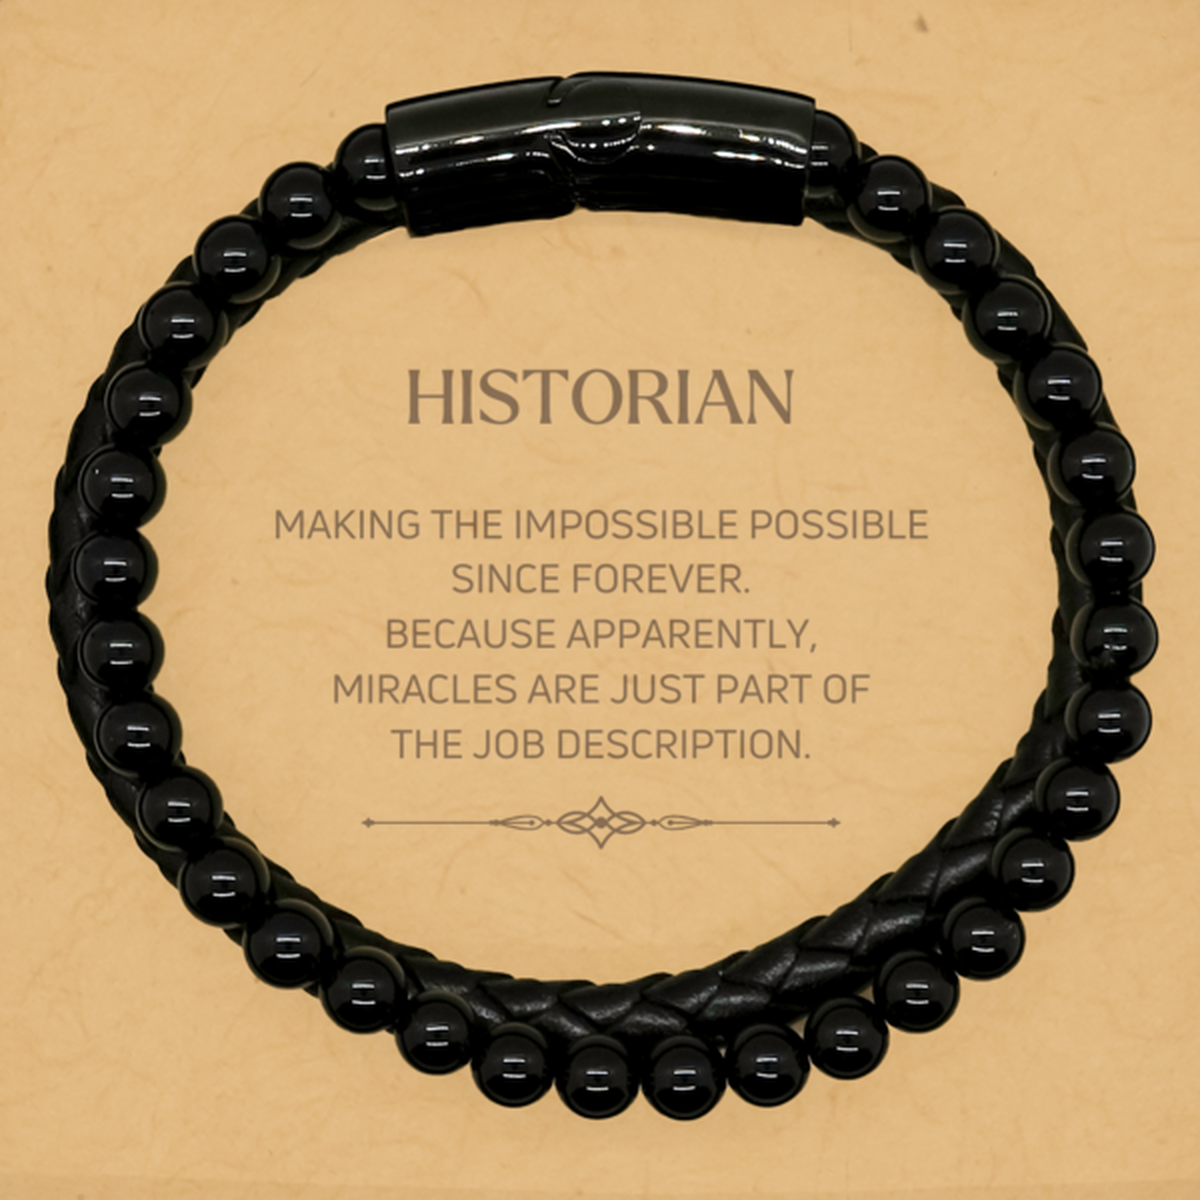 Funny Historian Gifts, Miracles are just part of the job description, Inspirational Birthday Stone Leather Bracelets For Historian, Men, Women, Coworkers, Friends, Boss